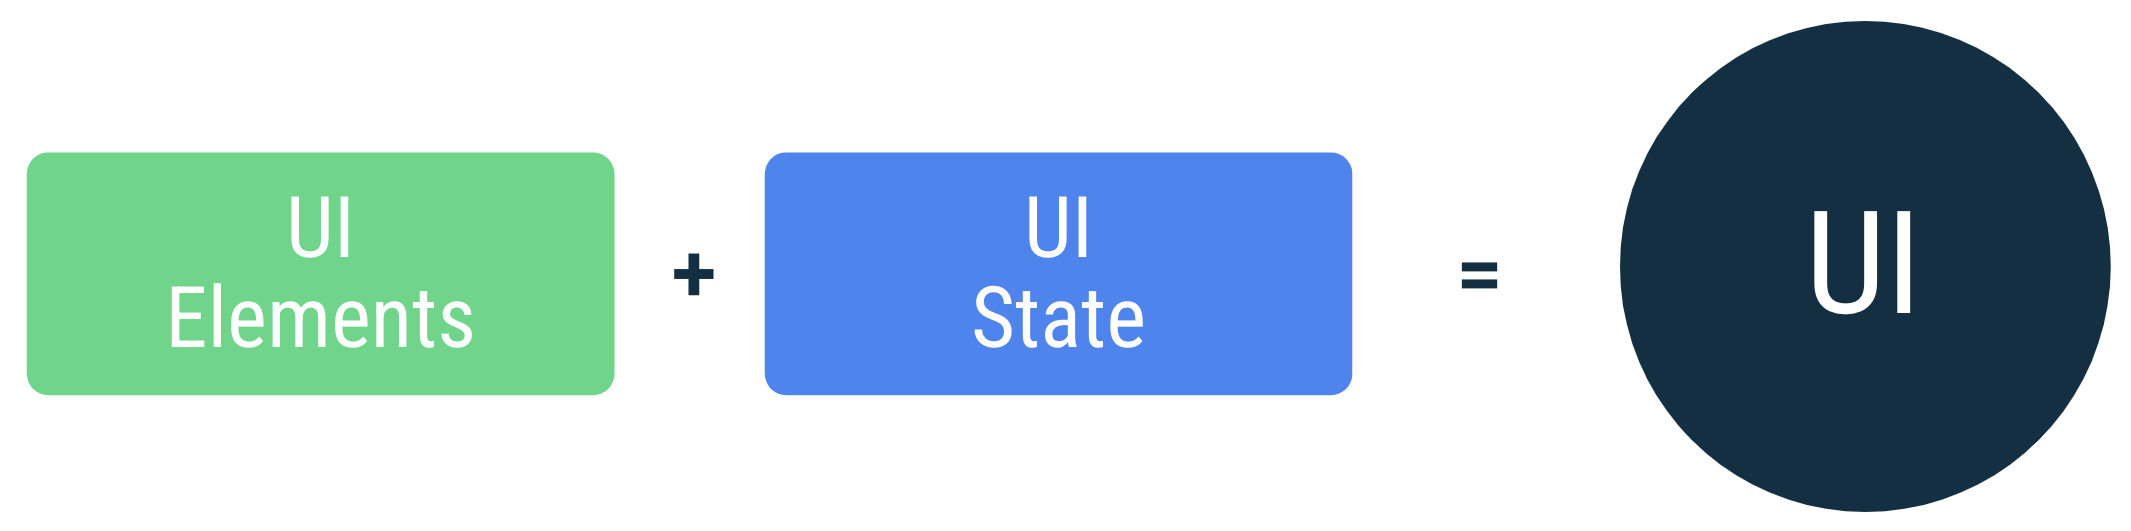 UI is a result of binding UI elements on the screen with the UI state.